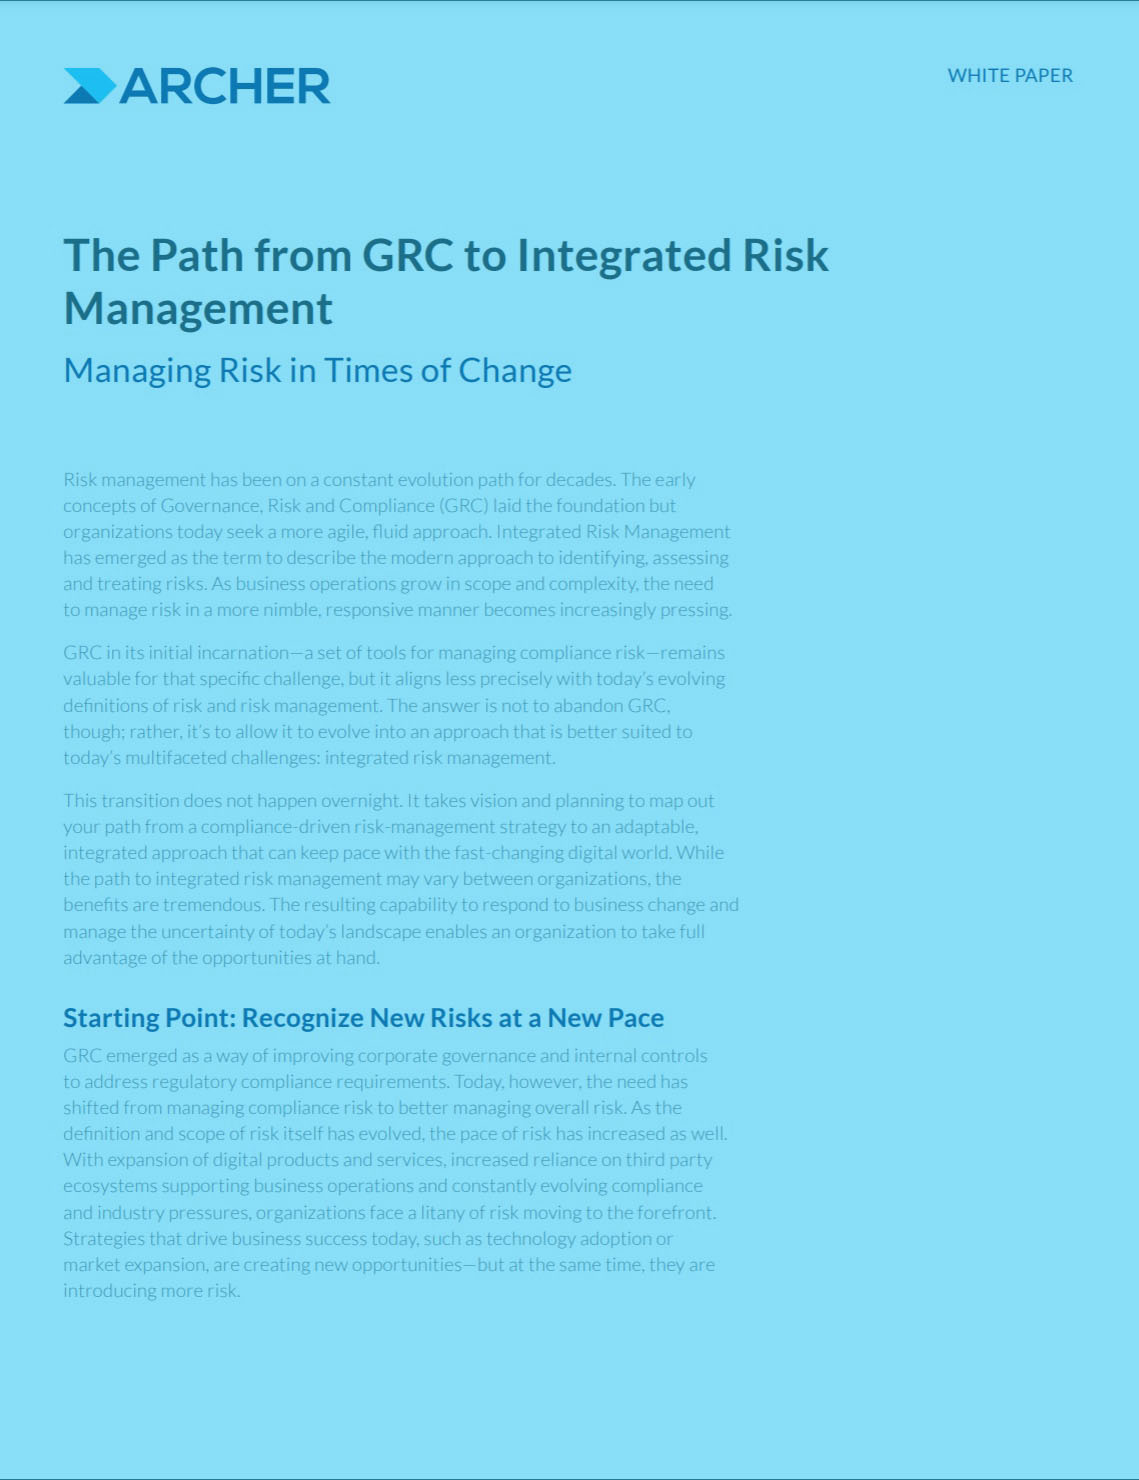 The path from GRC to integrated risk management